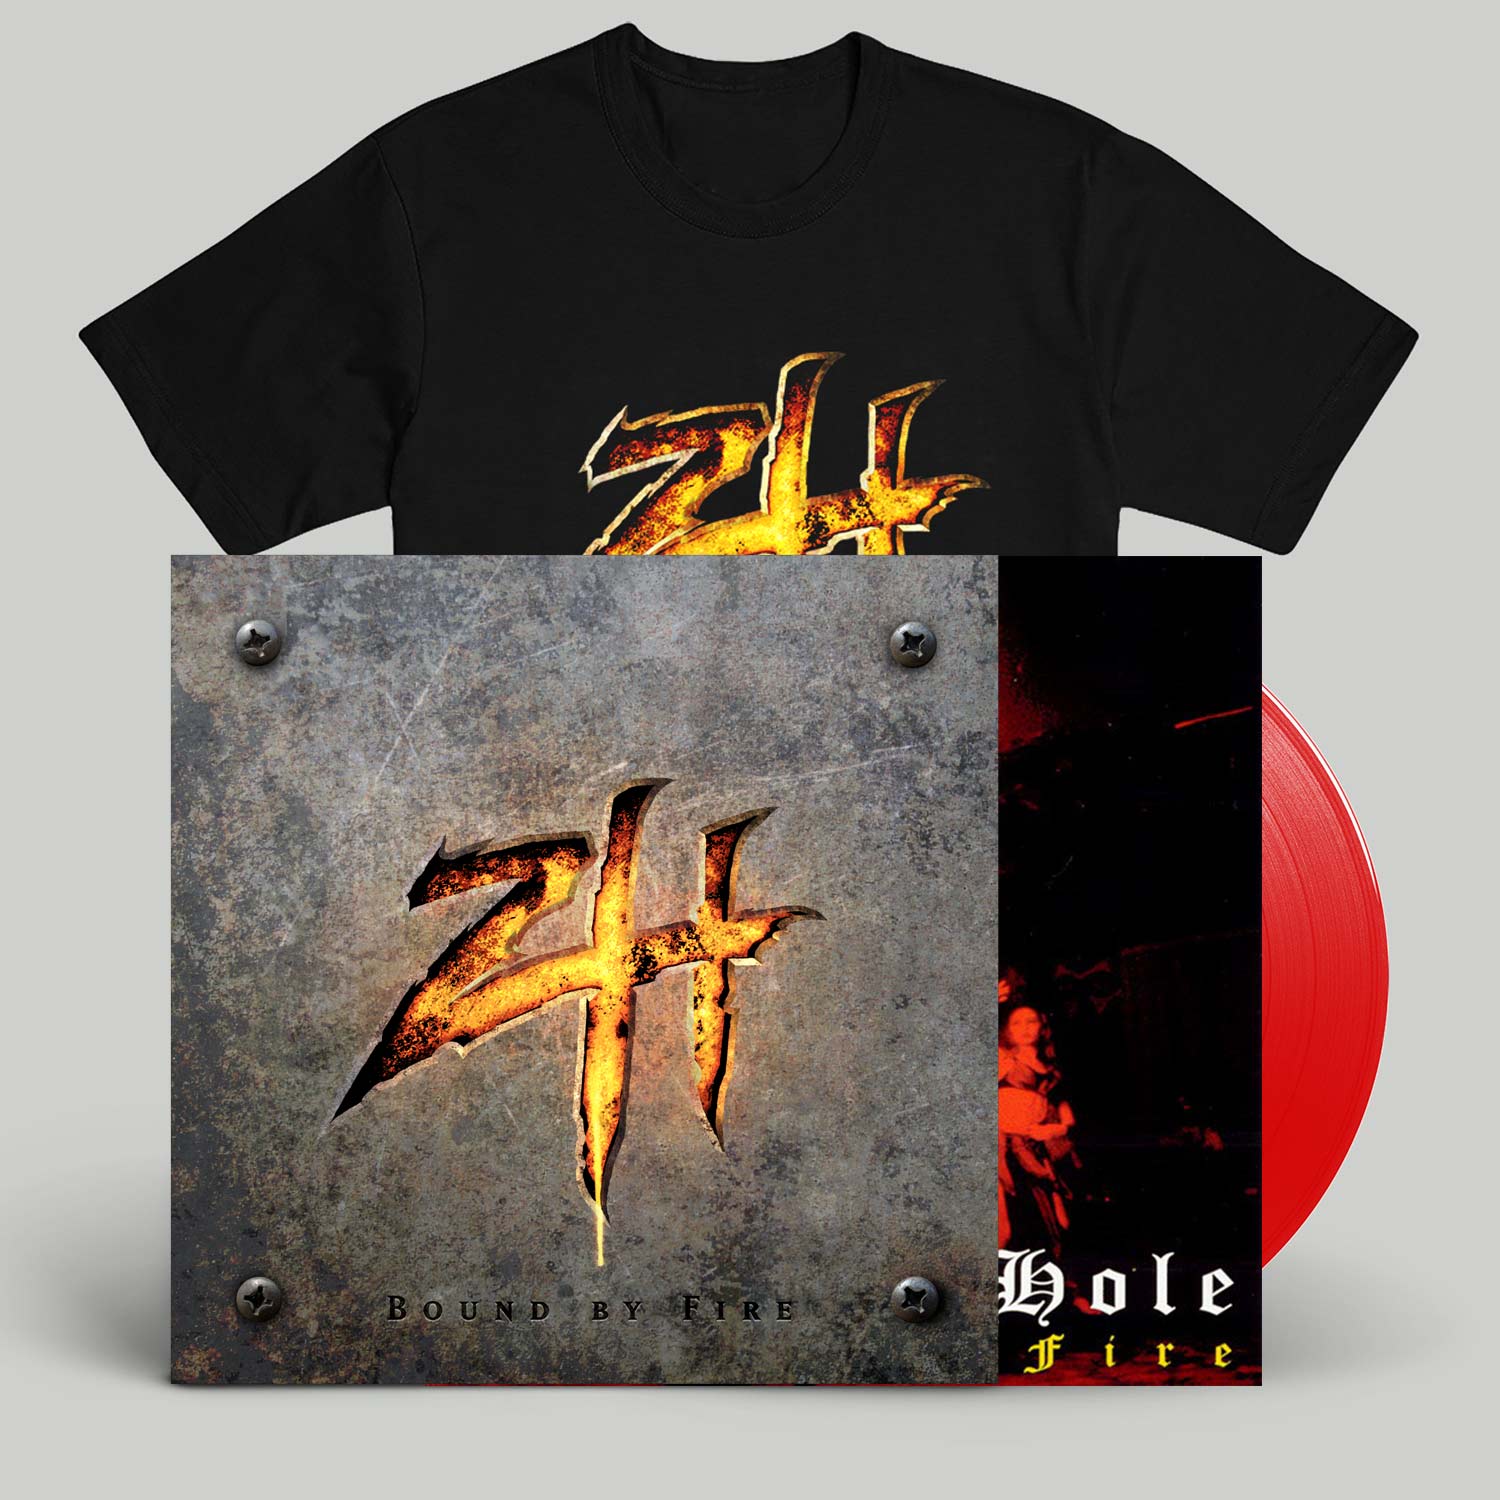 ZH Logo - Zimmers Hole “Bound By Fire” “Bloody Hole” Red 180 gram Vinyl ...